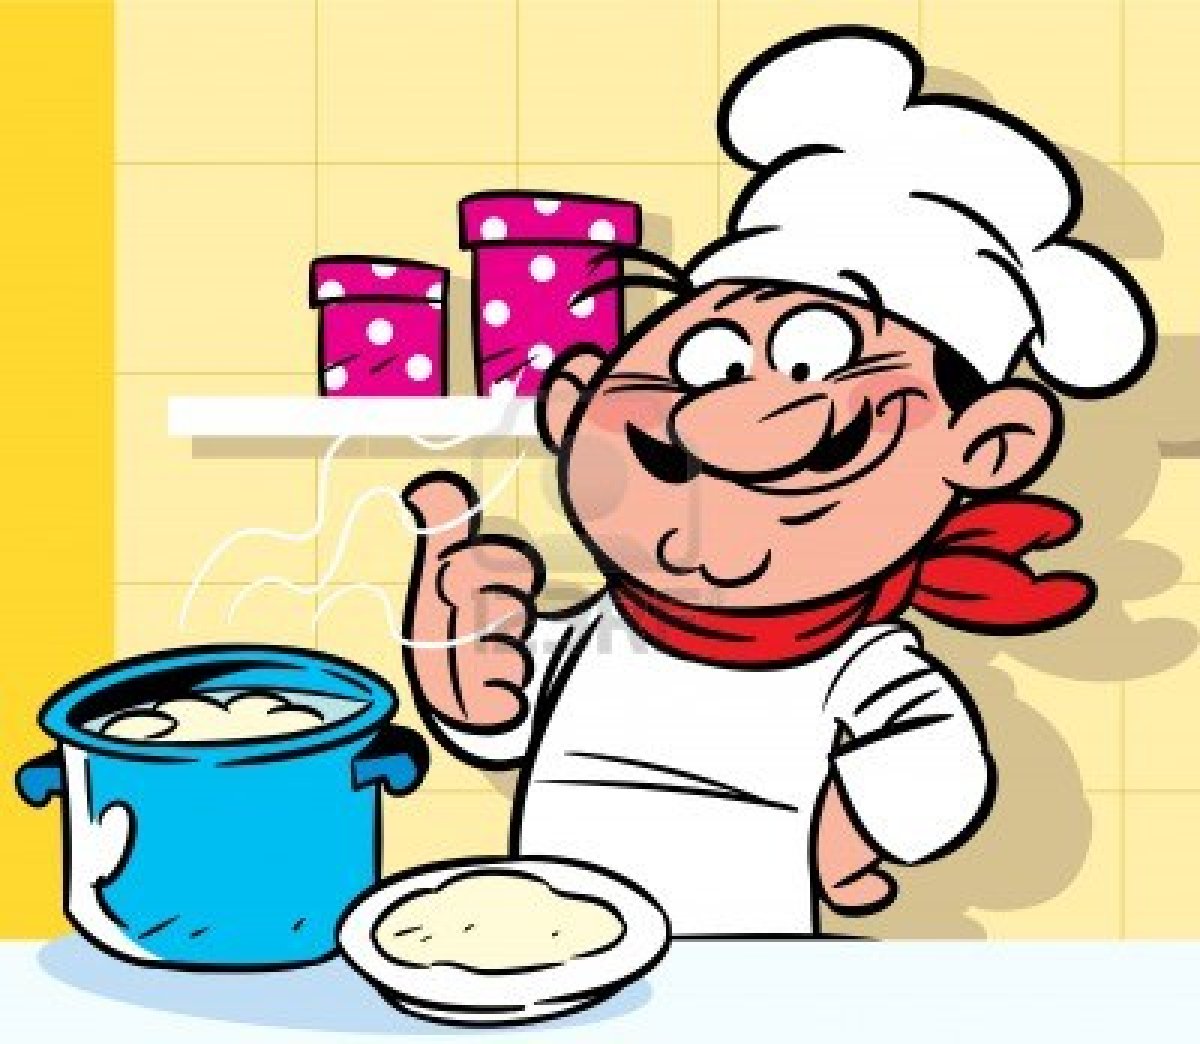 12368881 Funny Cartoon Chef Cooks In The Kitchen